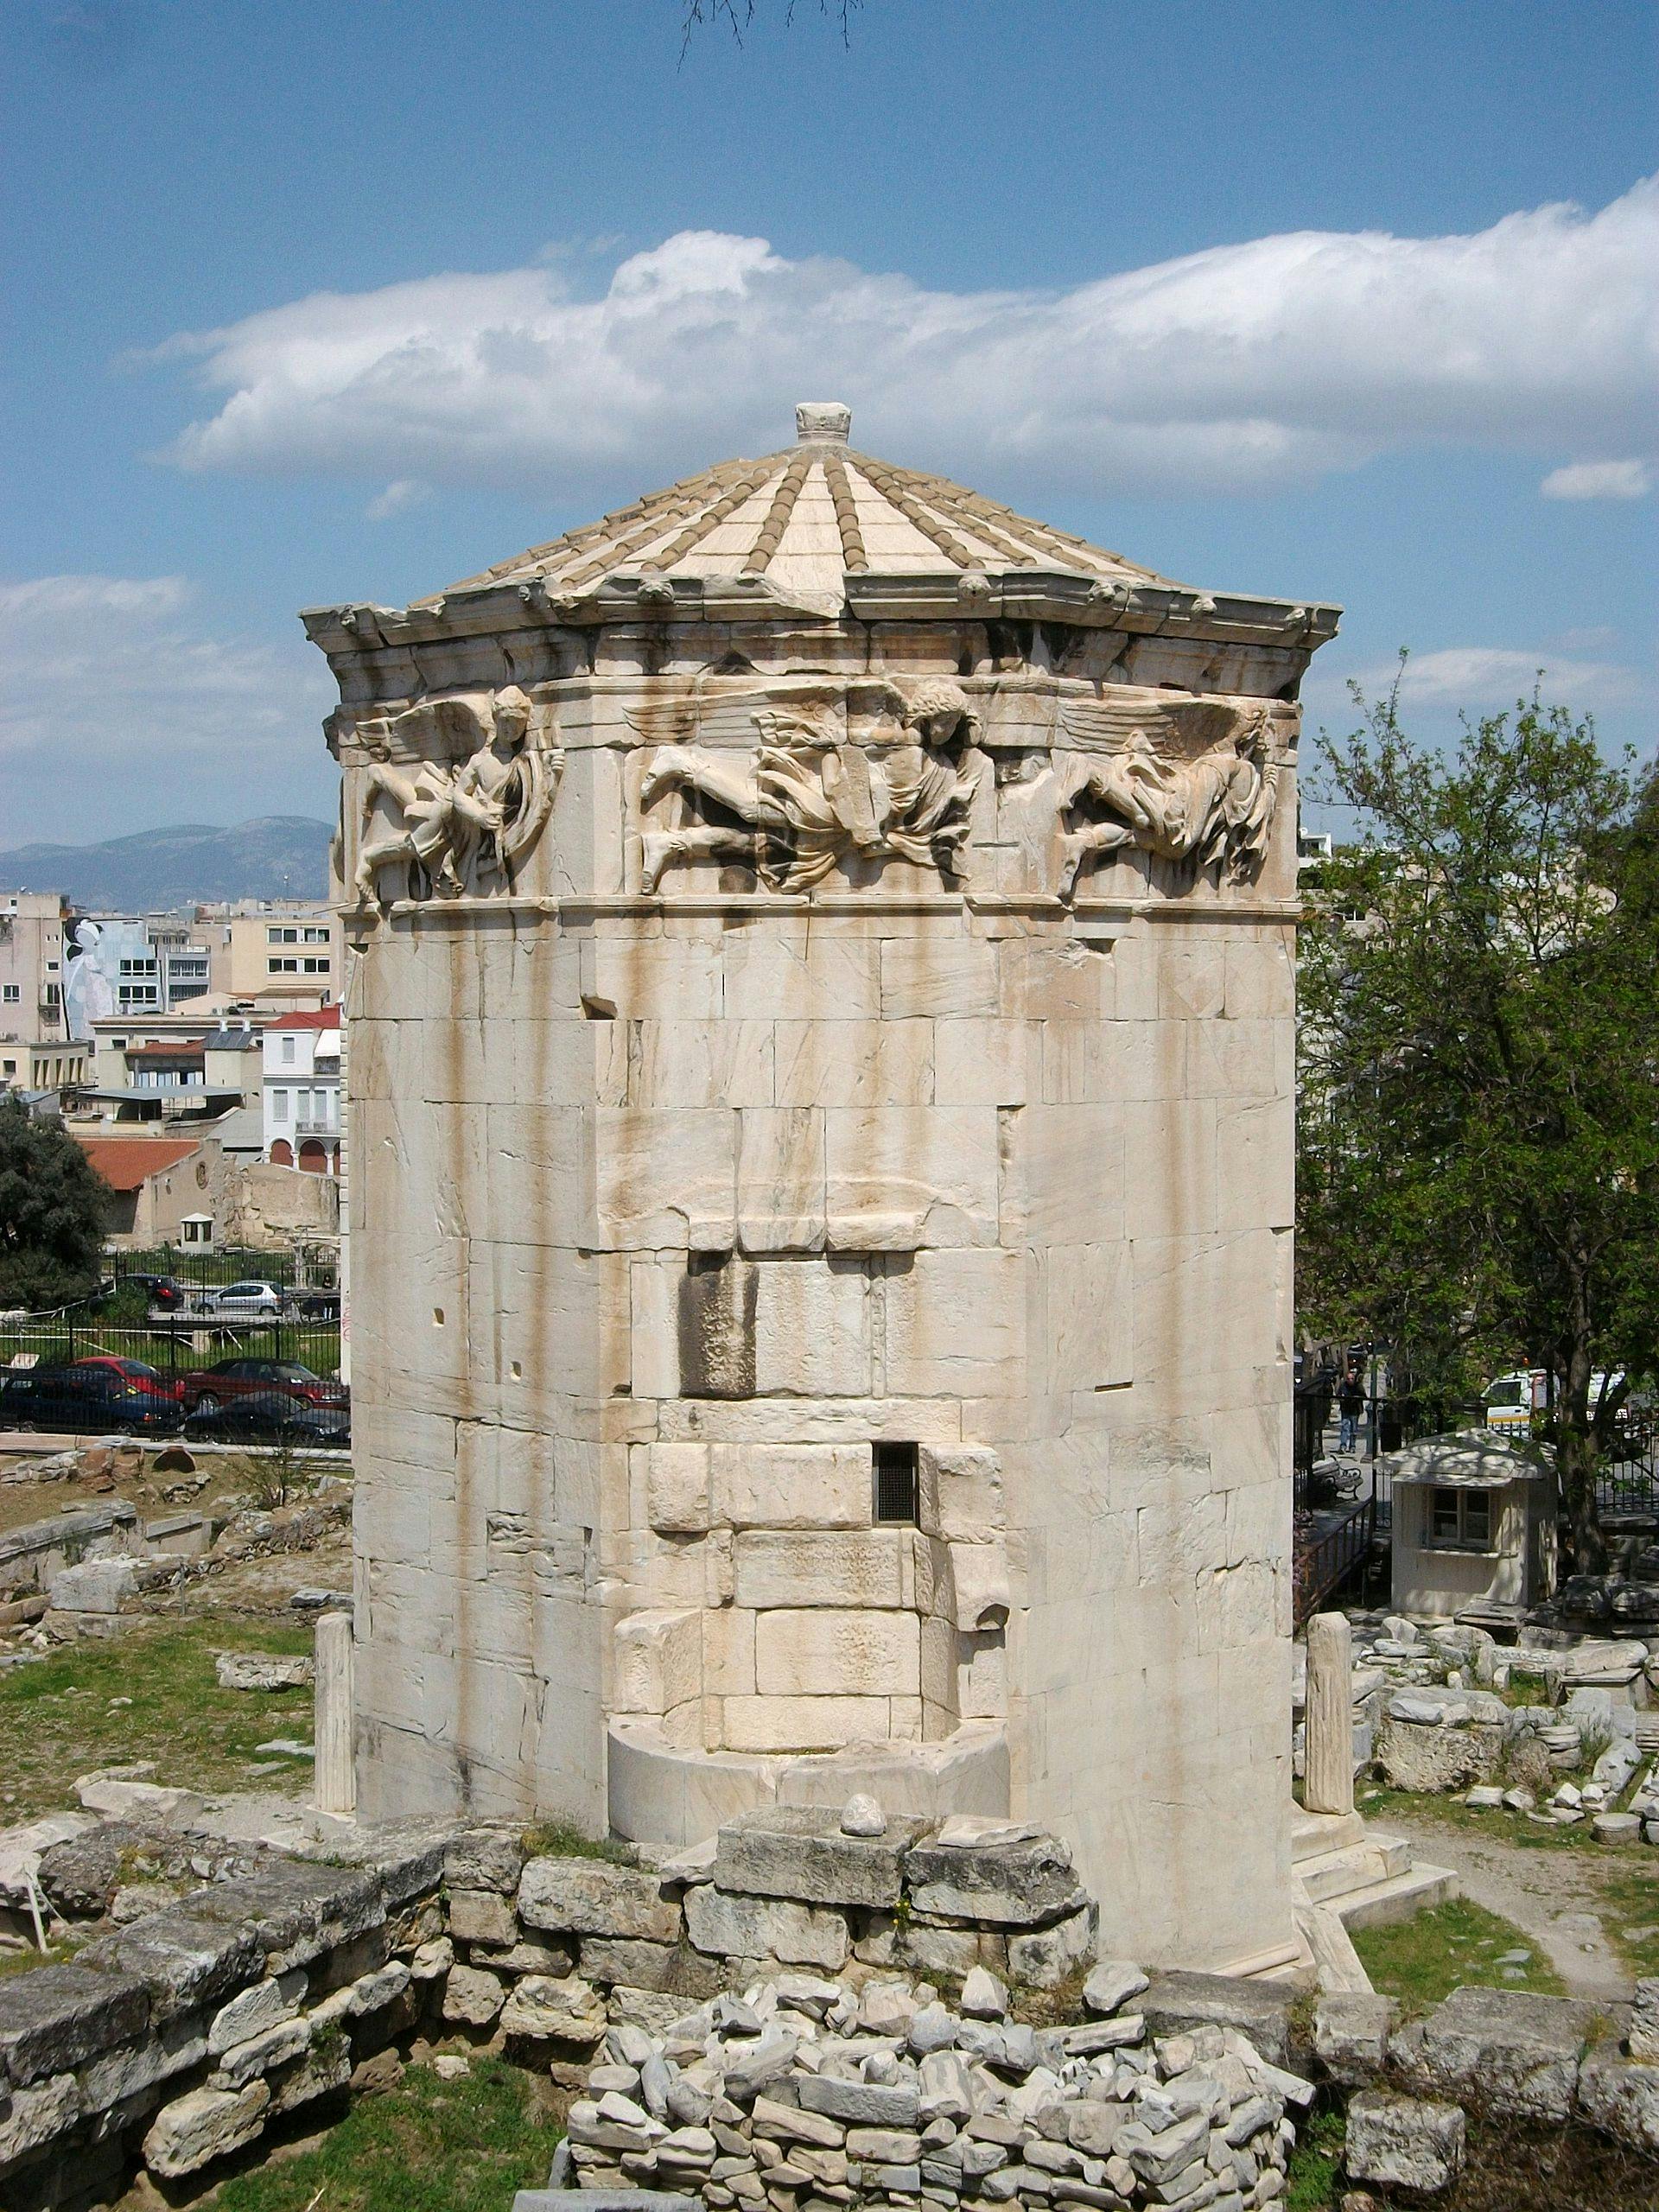 Tower of the winds (by kbulut58 on Wikicommons)